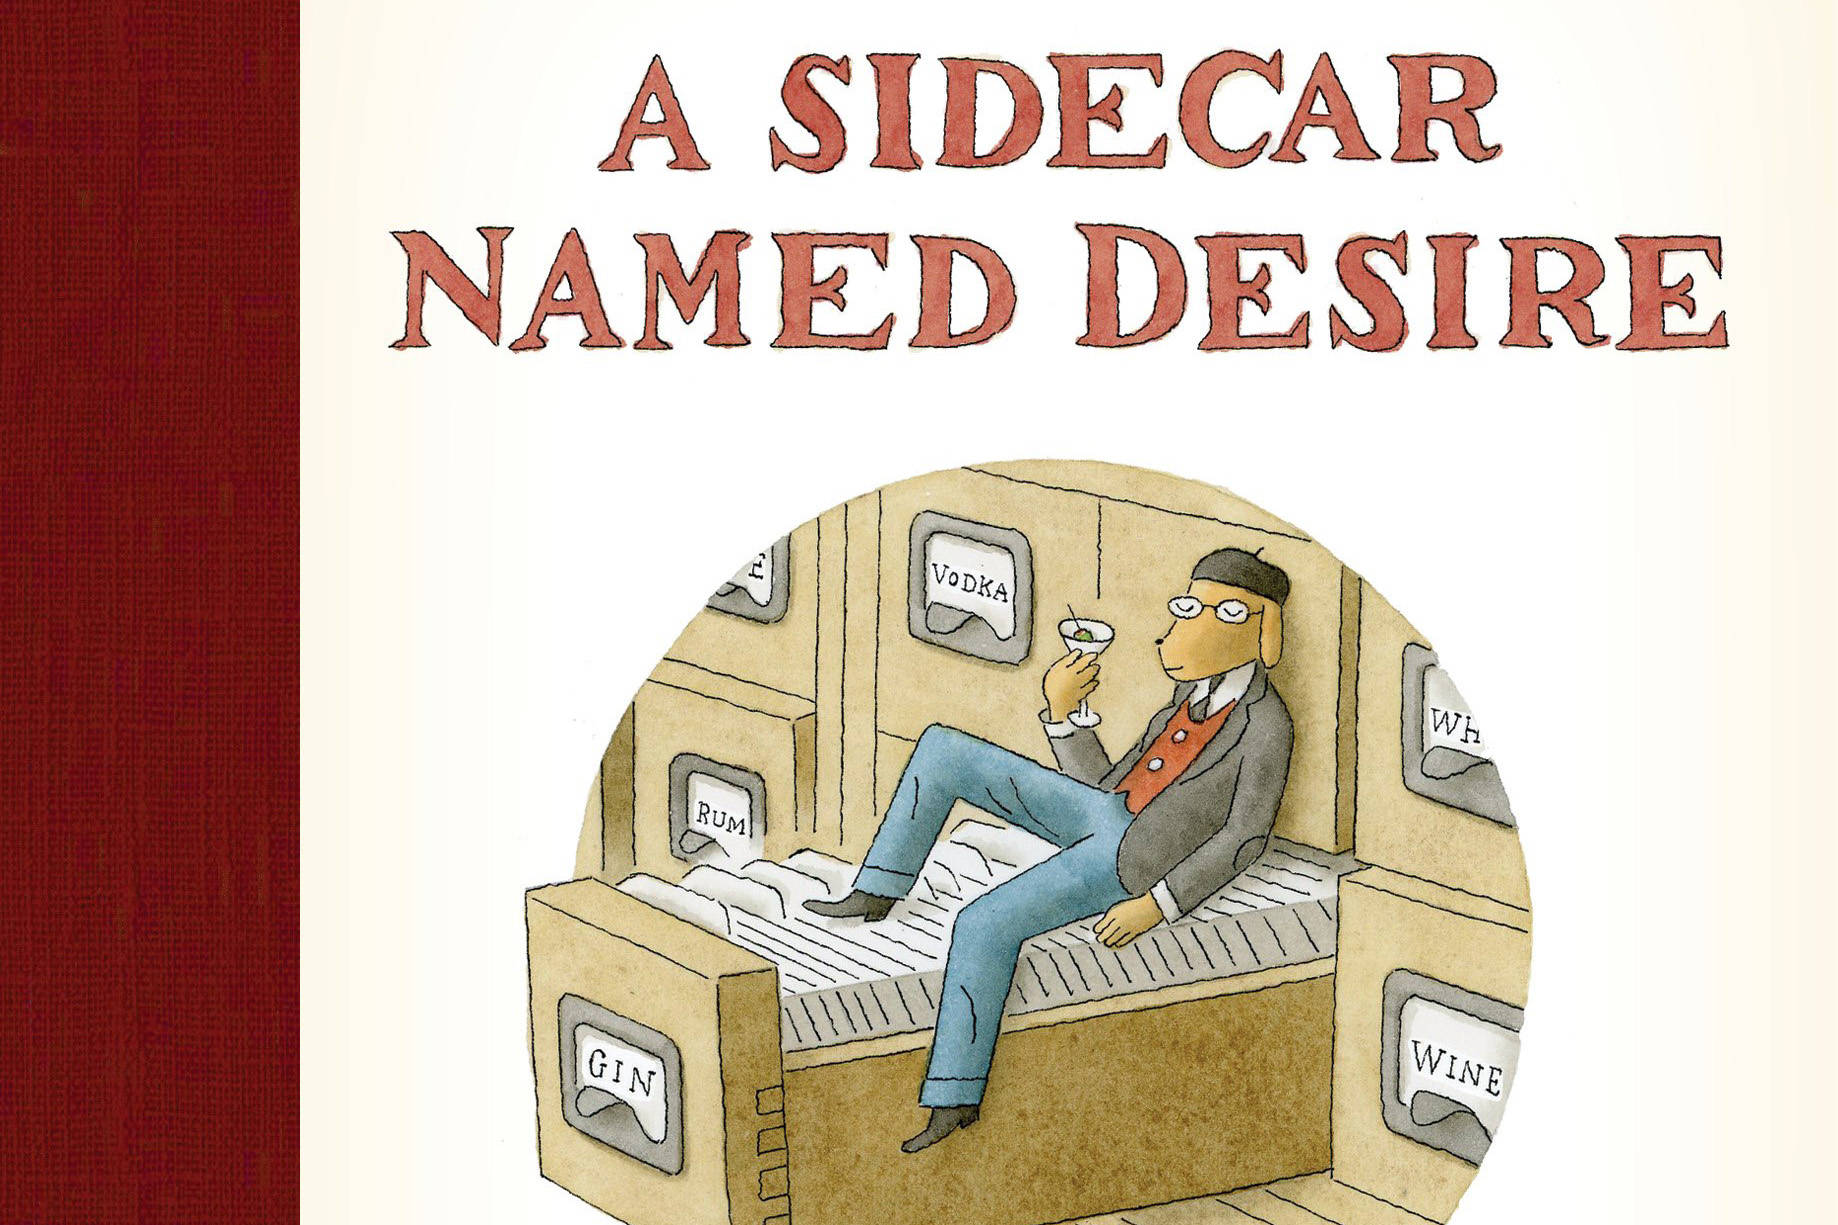 Reading, writing and drinking — ‘A Sidecar Named Desire’ offers the perfect trio